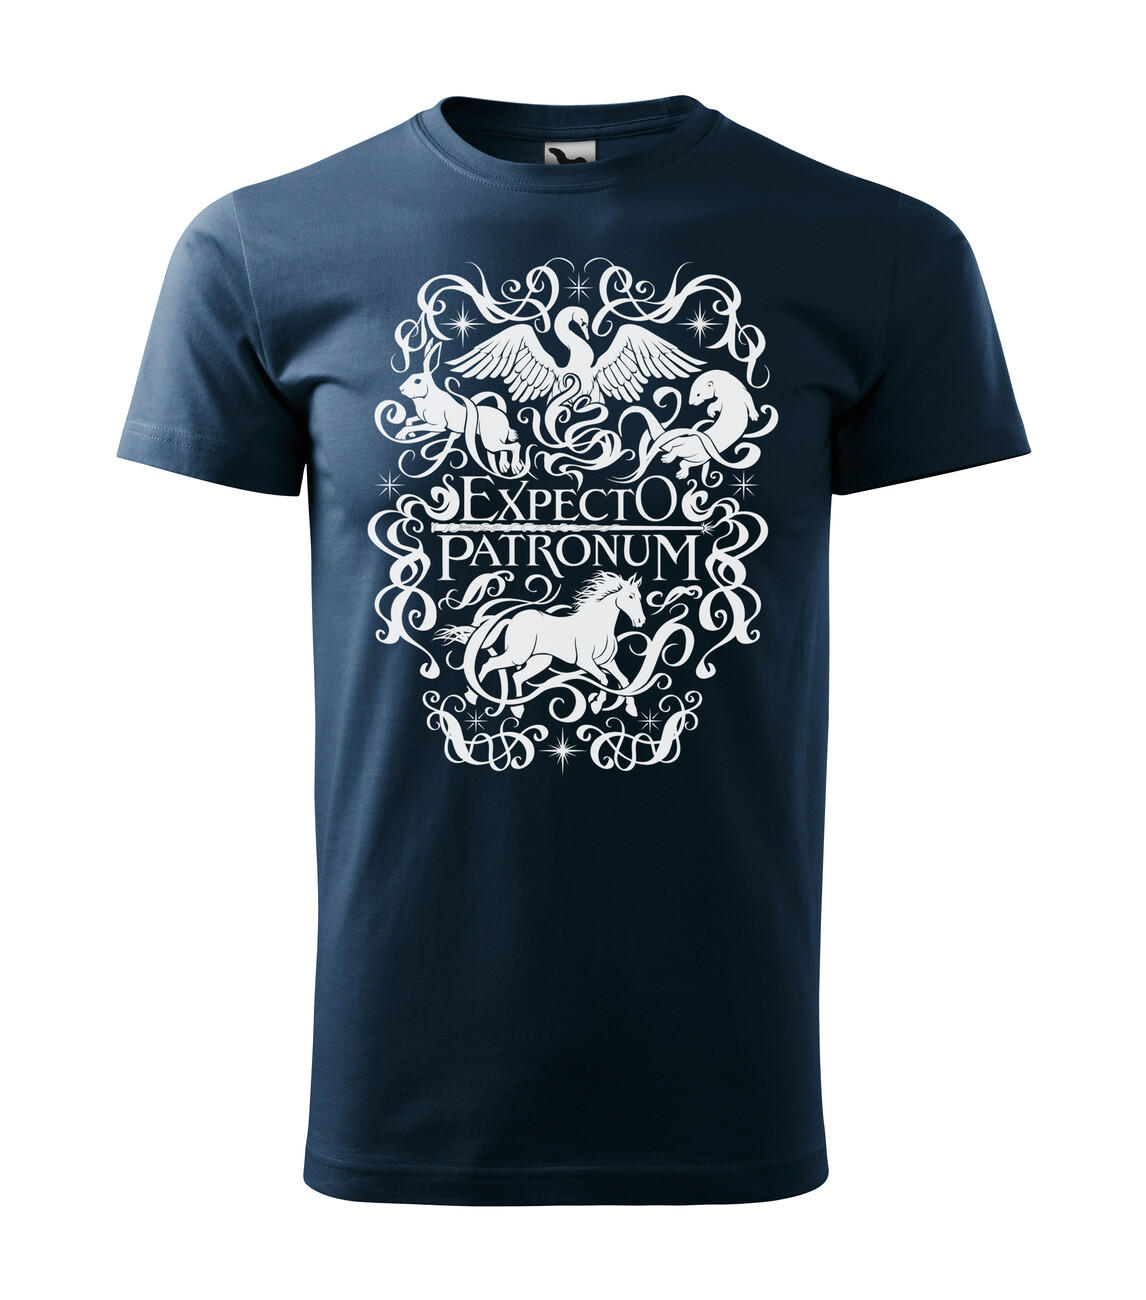 Harry Potter Expecto Patronum | Clothes and accessories for merchandise